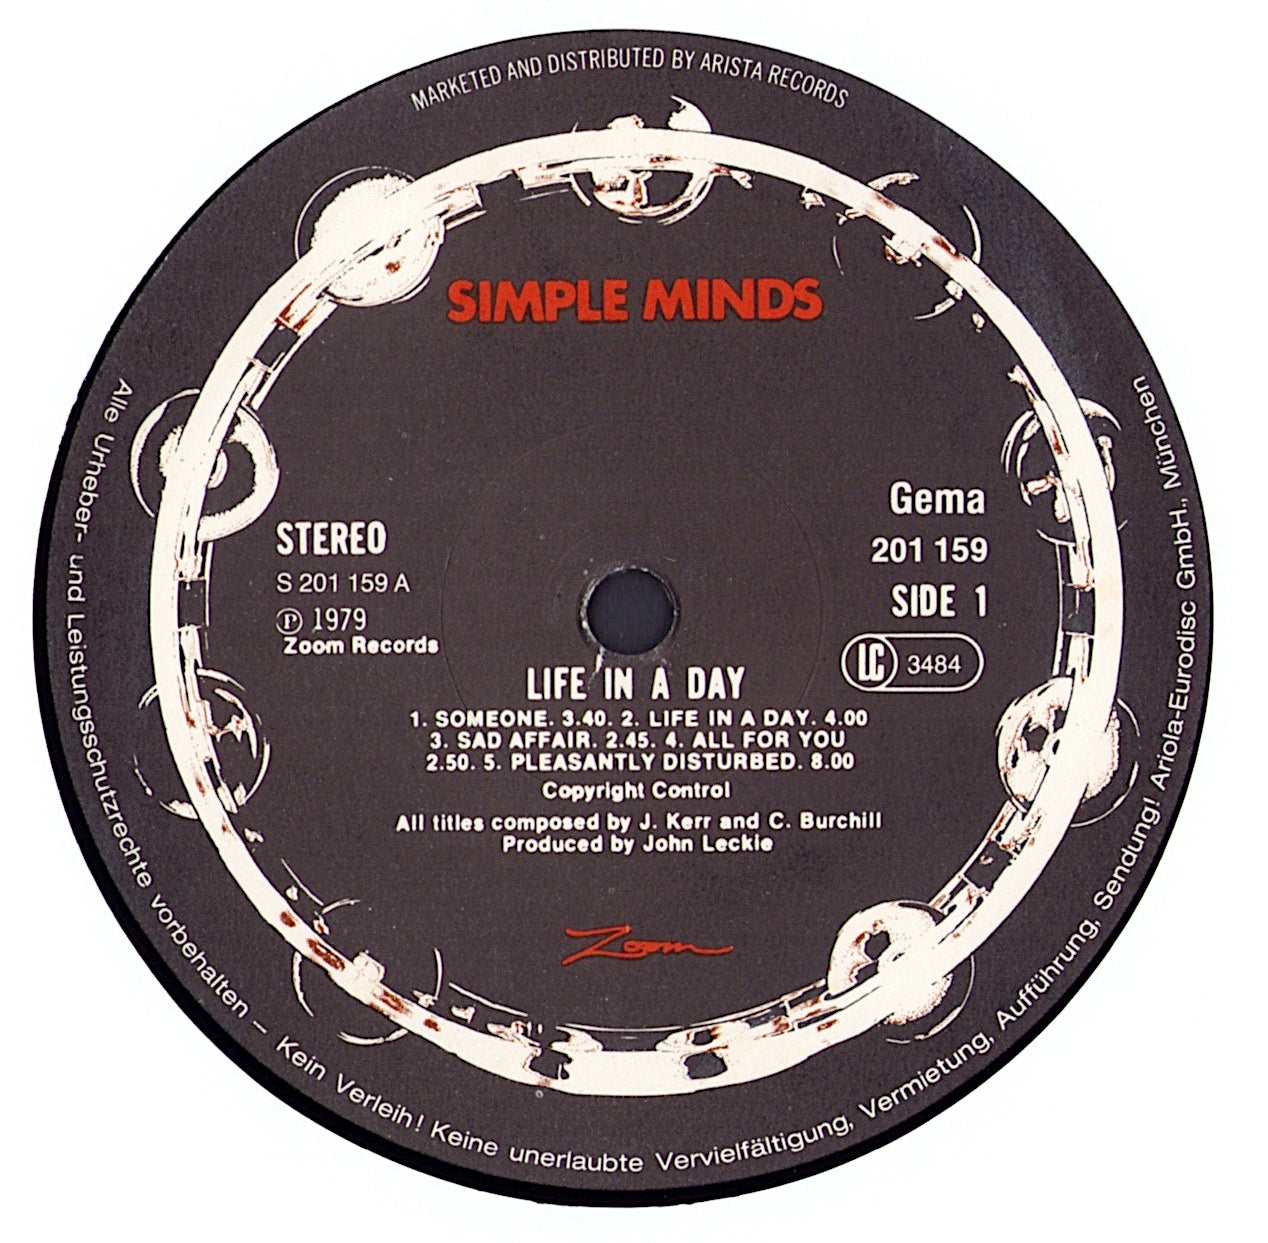 Simple Minds - Life In A Day Vinyl LP